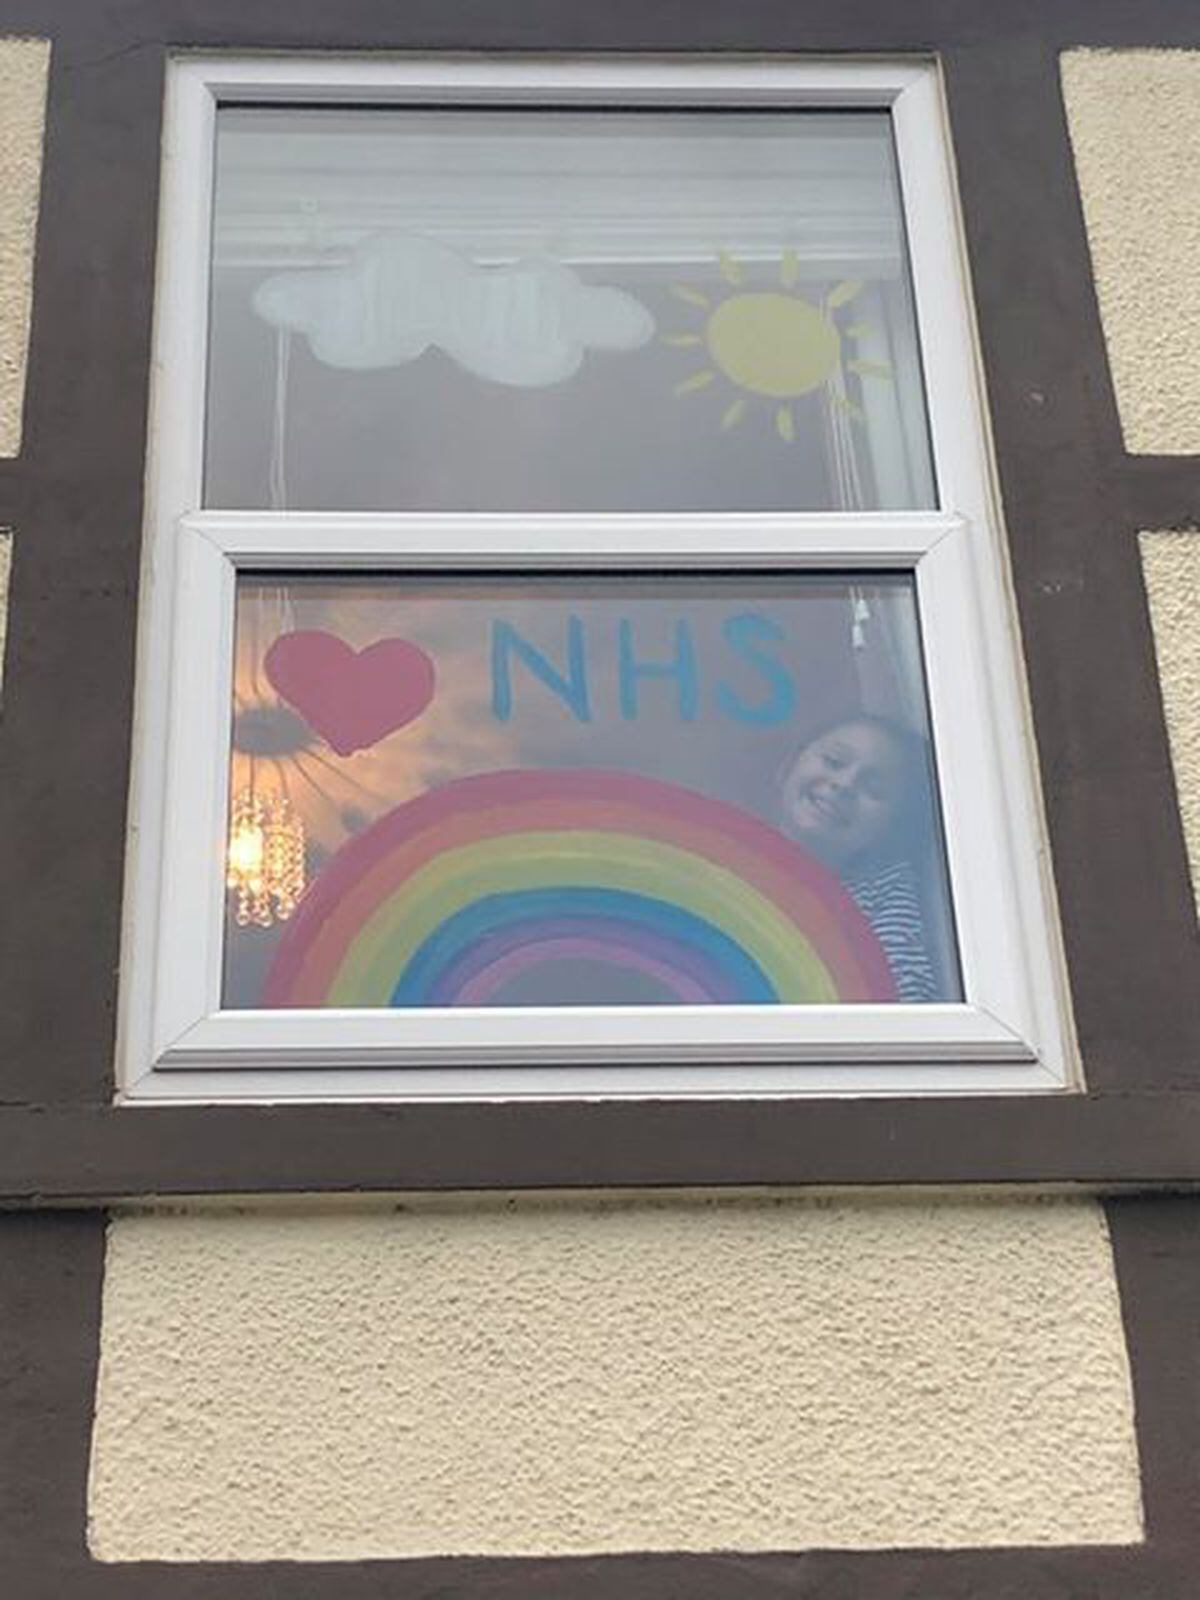 Hannah Hill, aged nine, from Milton Road, Fallings Park, Wolverhampton, with her rainbow design to honour NHS workers